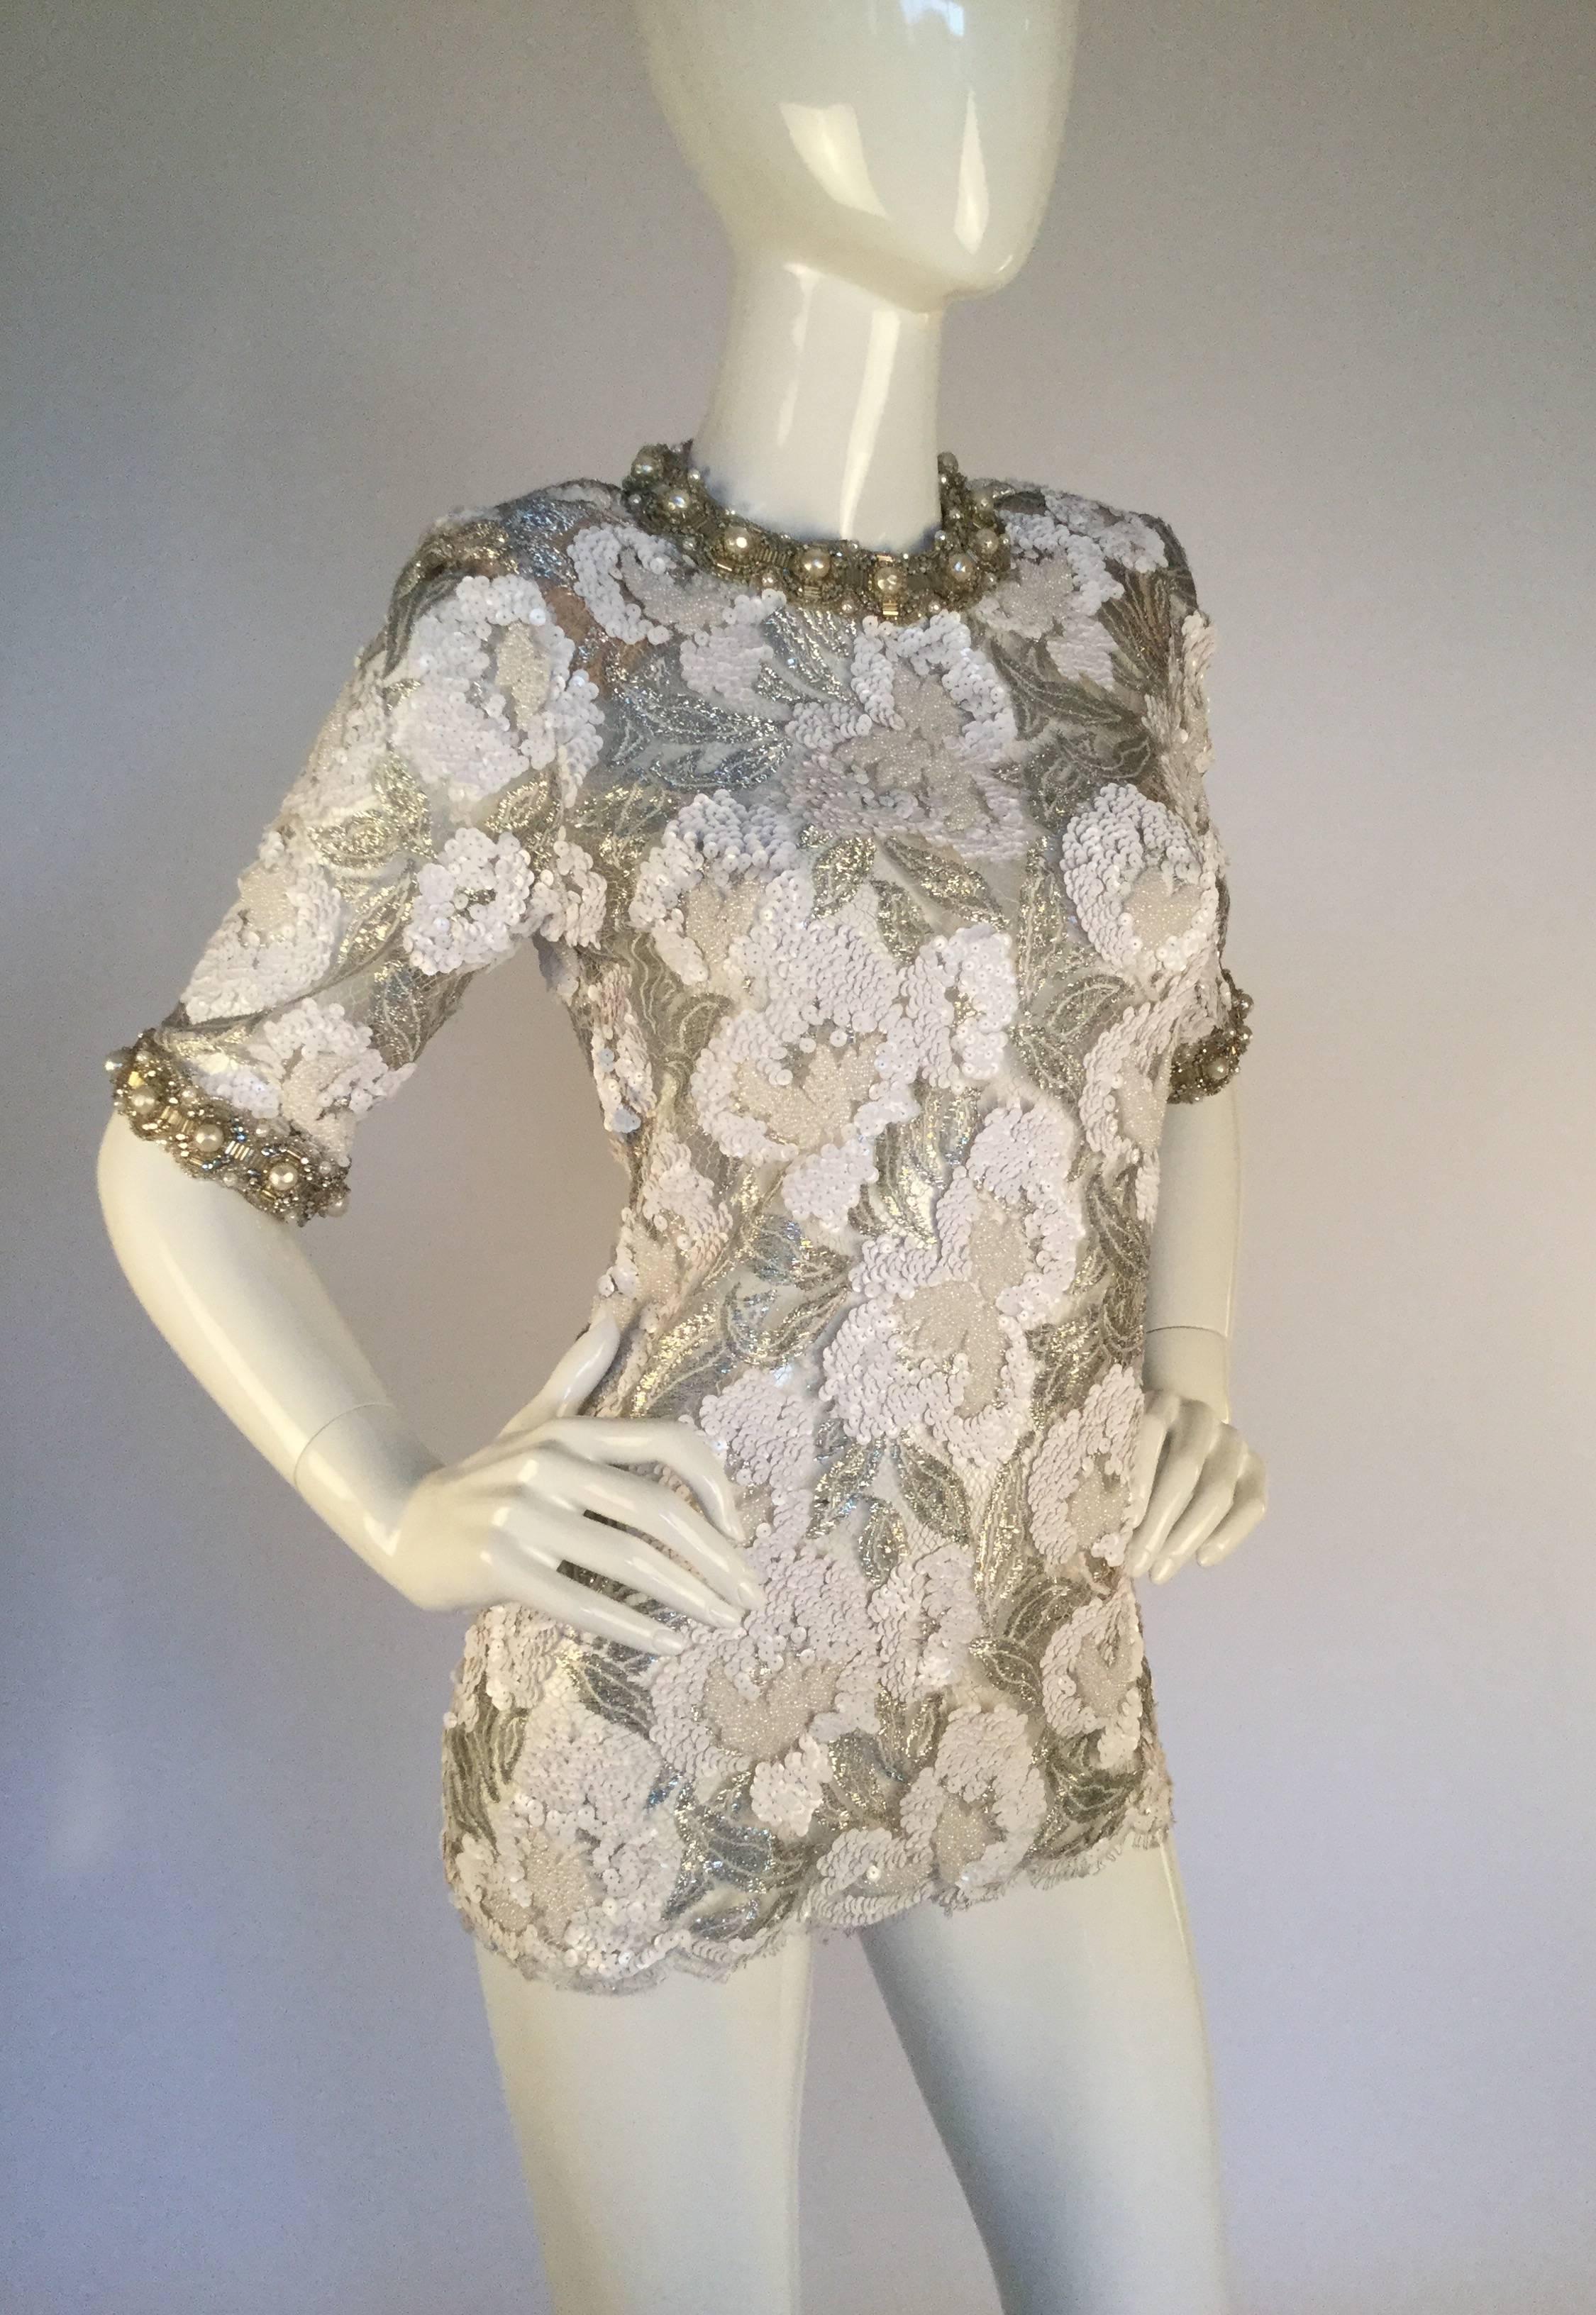 Simply devine 1970's silver semi sheer metallic lace top by Adolfo. Short sleeves with a scalloped edge compliment the top as it is finished with a gorgeous ivory circular pattern of pearls, clear rhinestones, and beading. The neckline is bordered